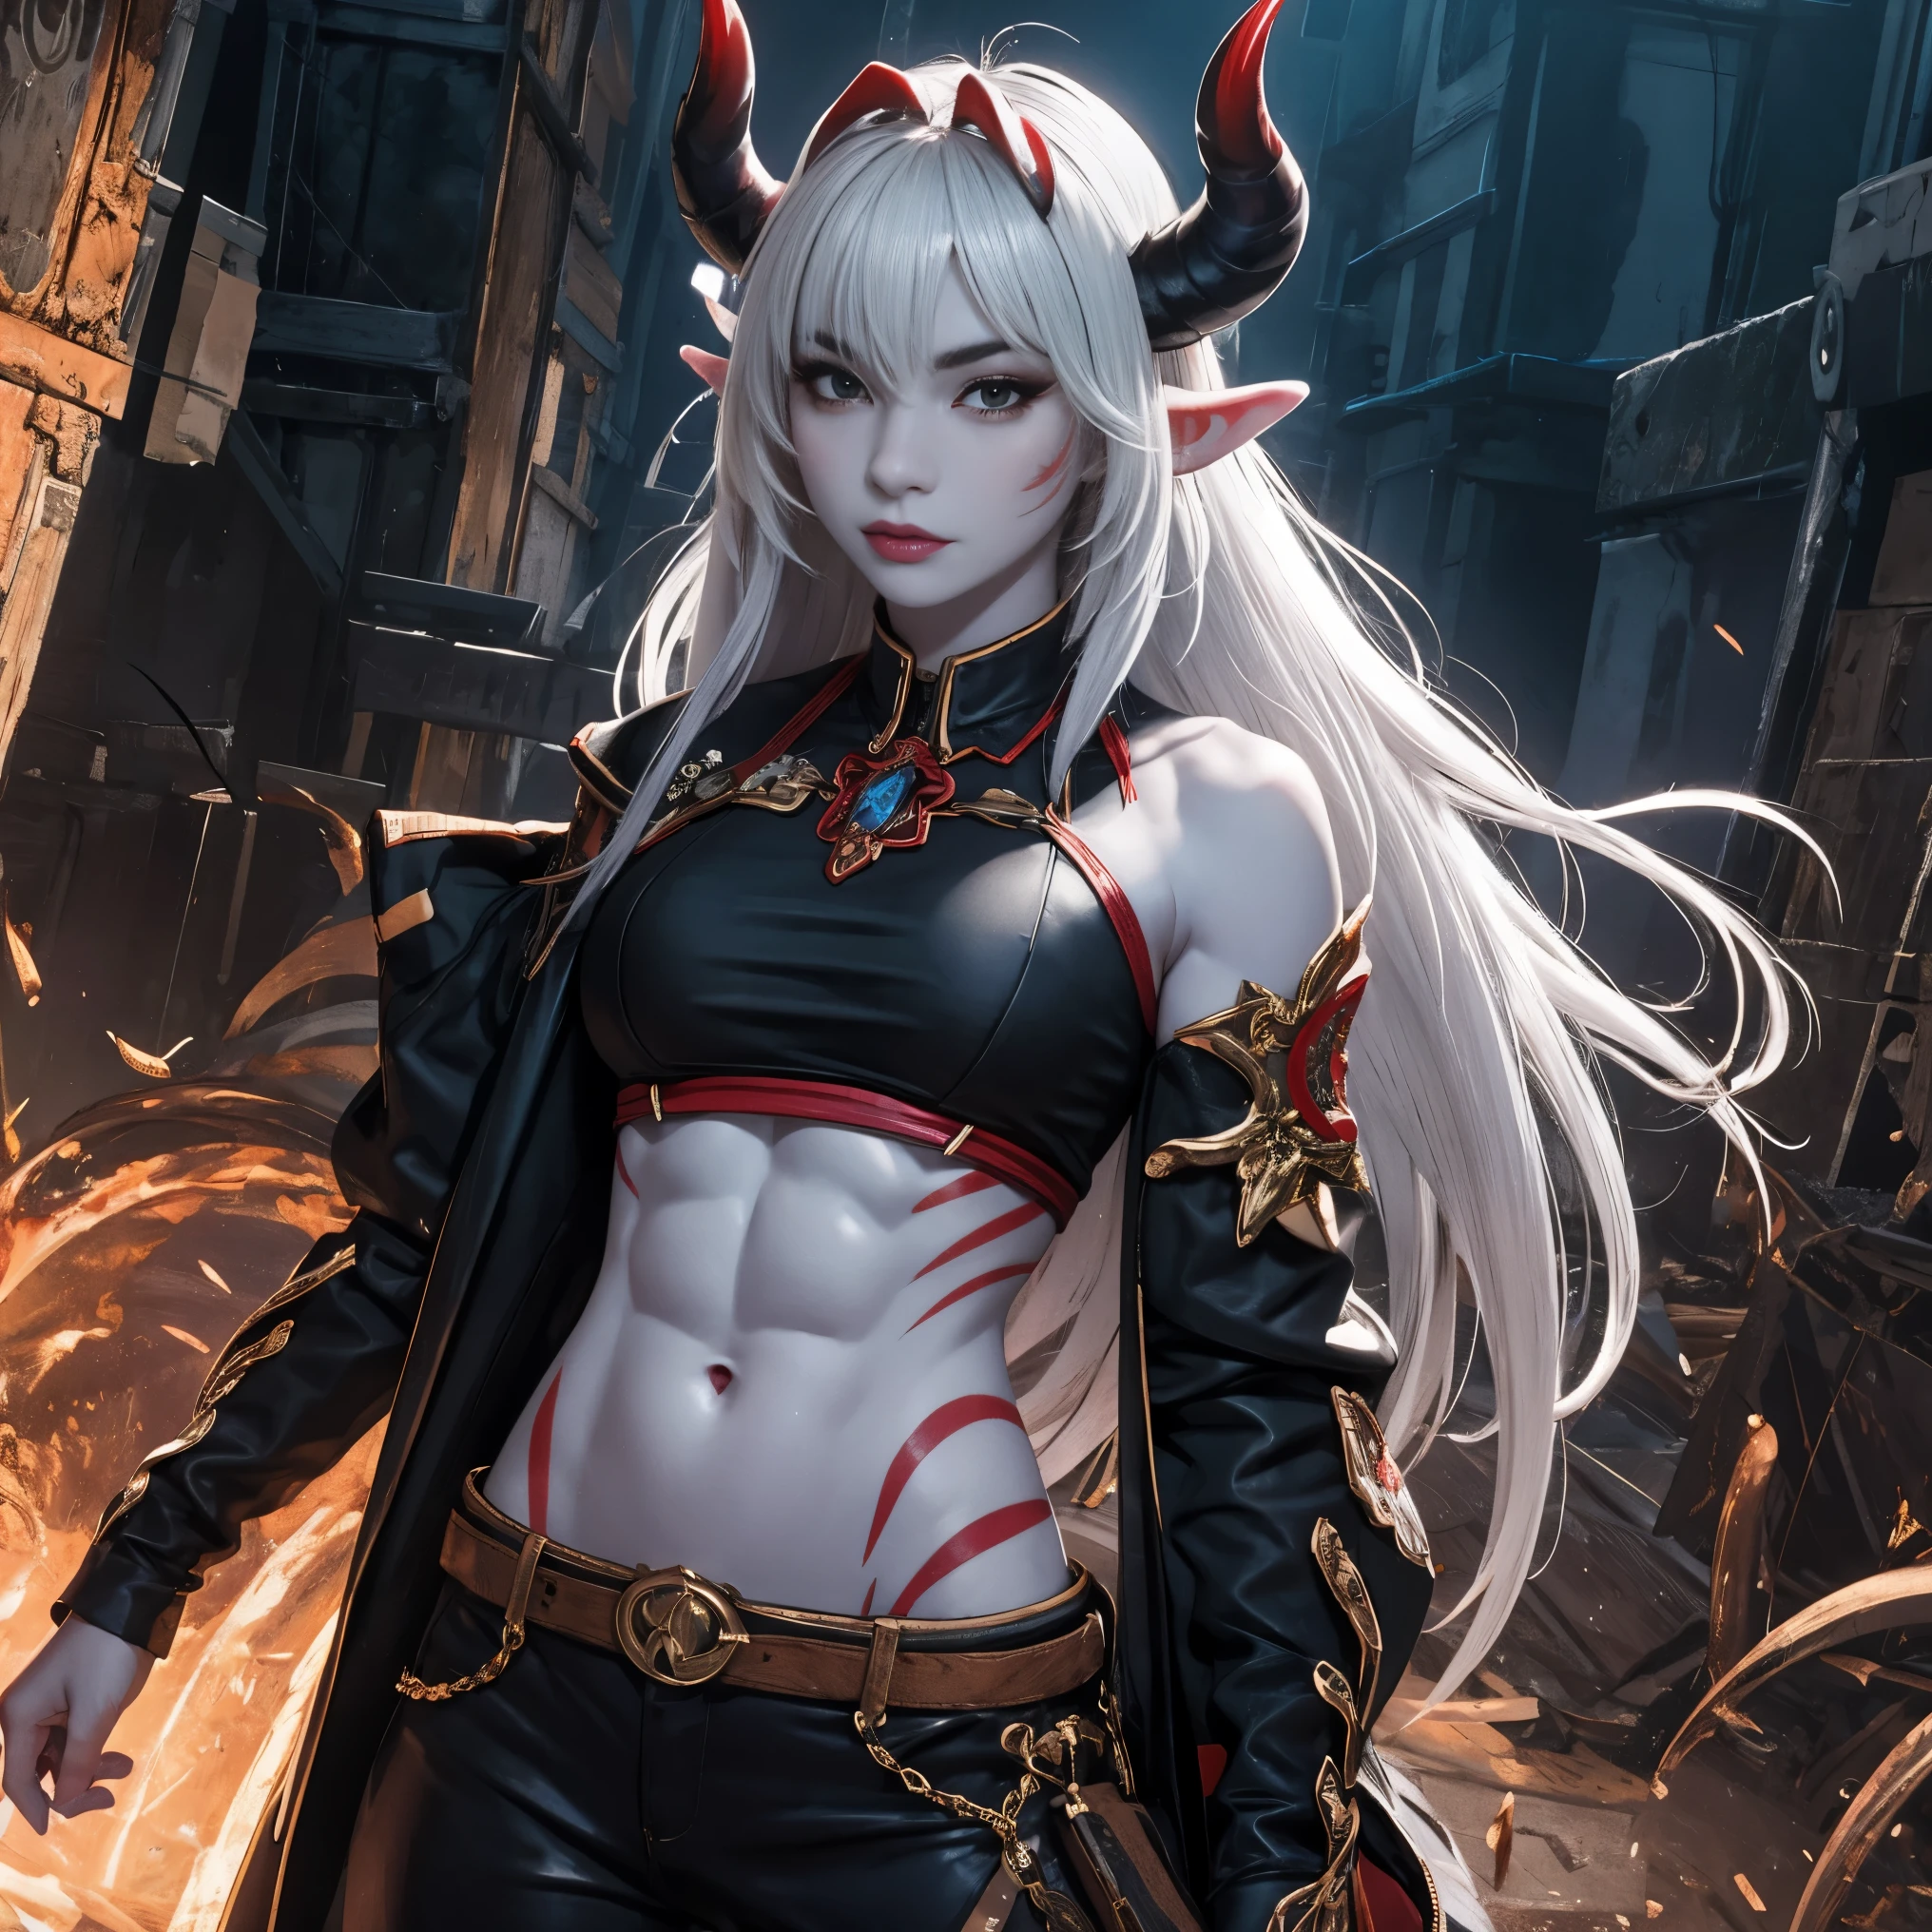 masterpiece, 8k resolution, high quality, high resolution, best quality, extremally detailed, best resolution, absurd resolution, ray tracing, high detailed, extremely detailed,detailed face, shoulder length white hair, female oni,two red horns on her head, muscular body, blue skin, scars, six pack abs, exposed midriff, tall, solo female